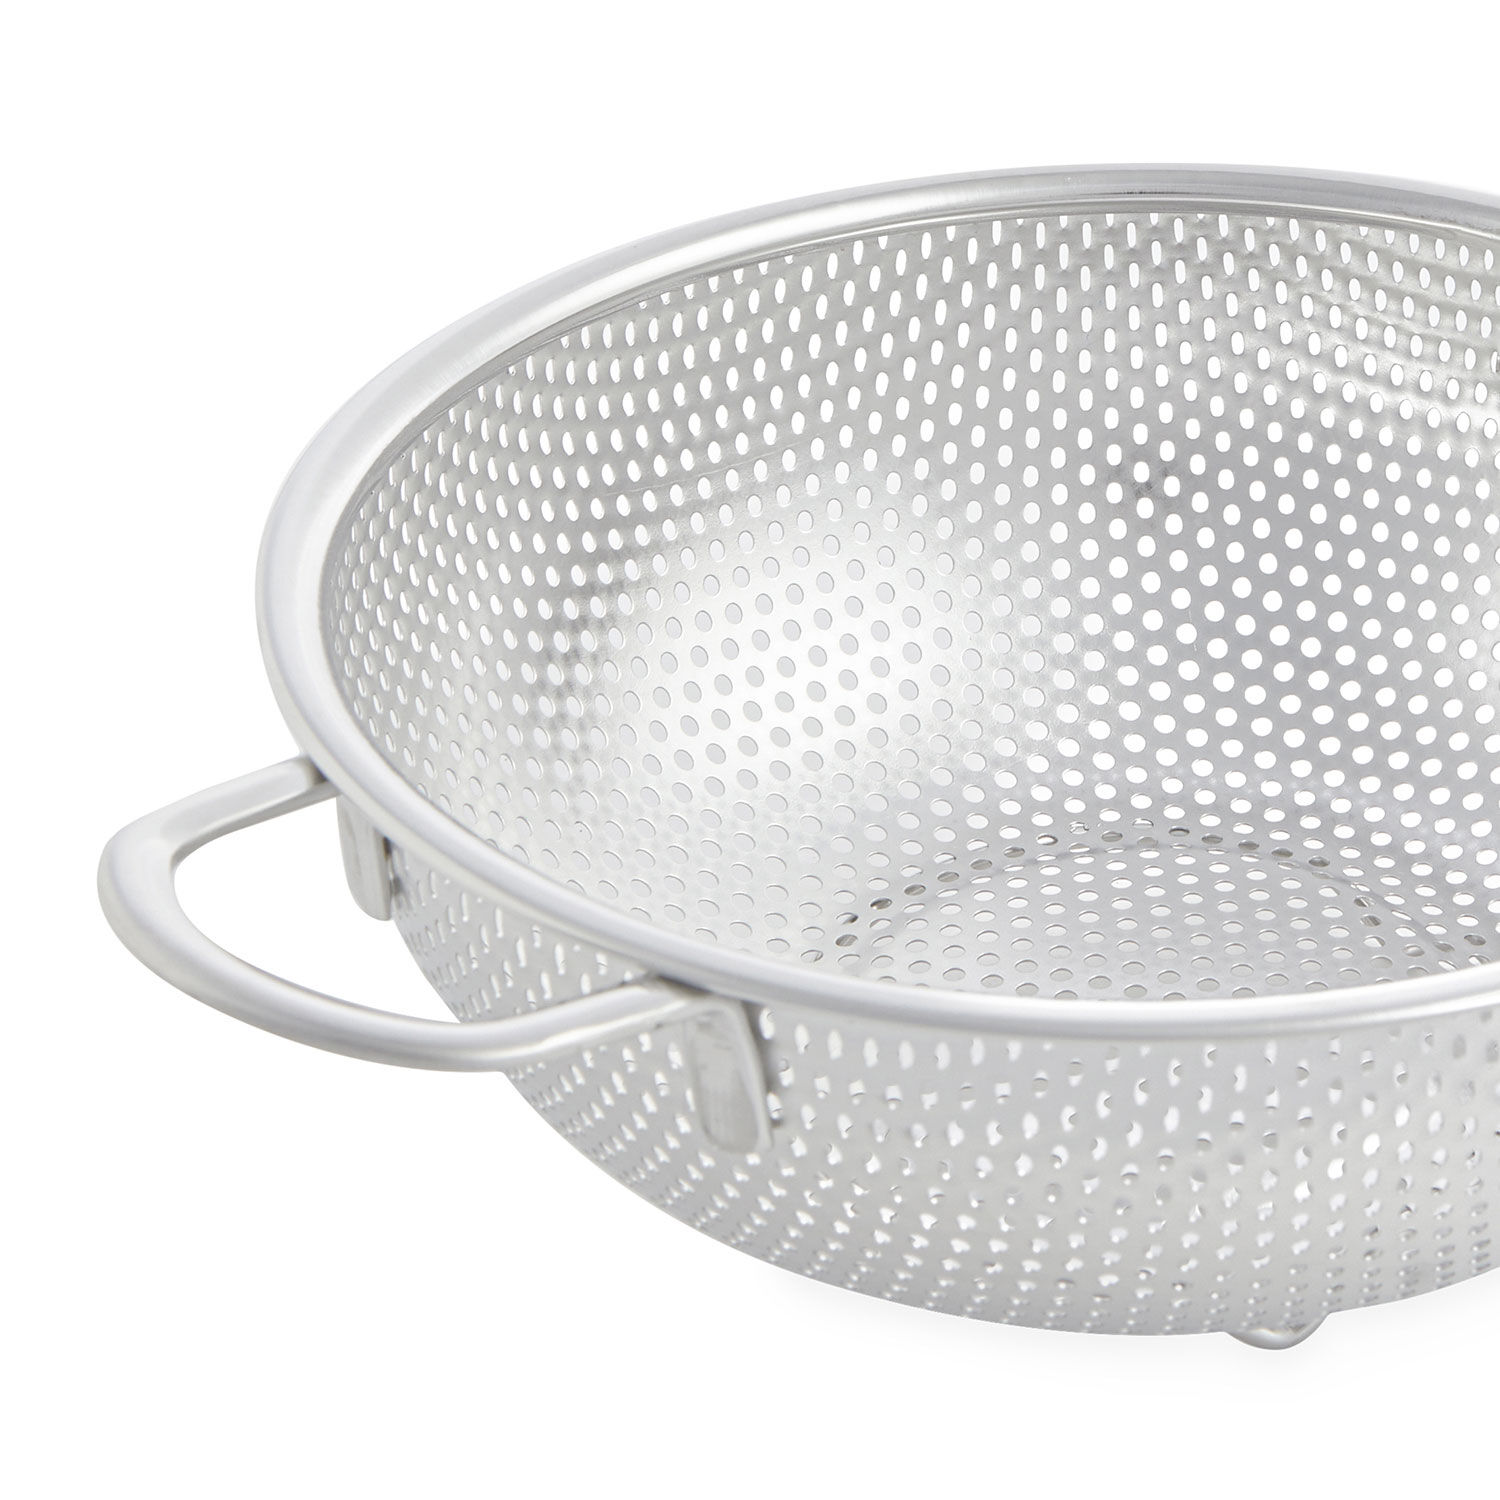 Tala Stainless Steel Strainer with Soft Grip Handle 